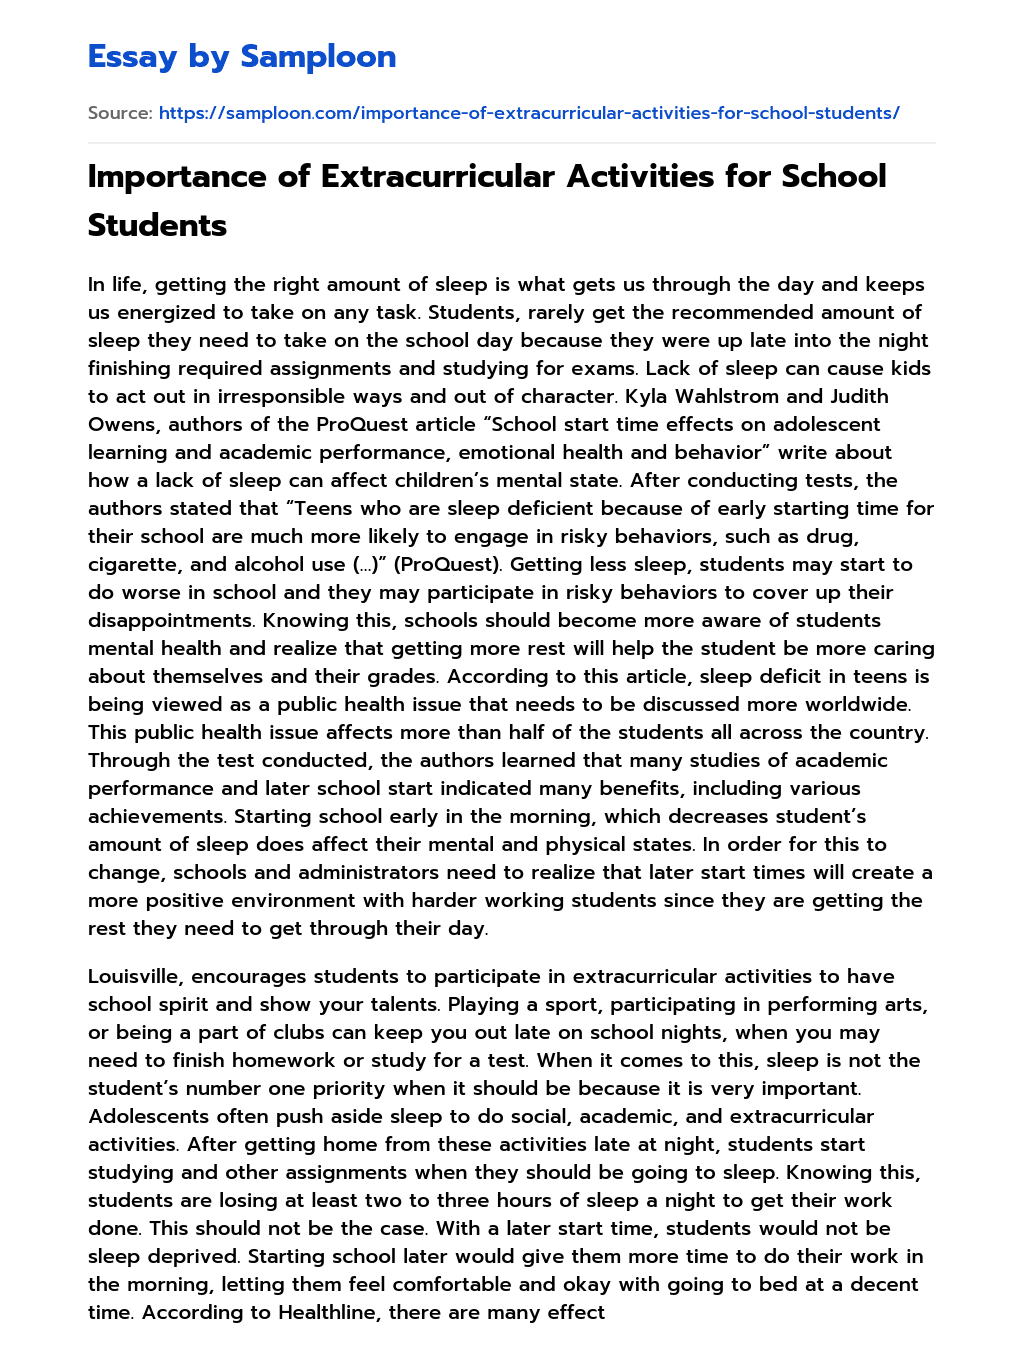 Importance of Extracurricular Activities for School Students essay